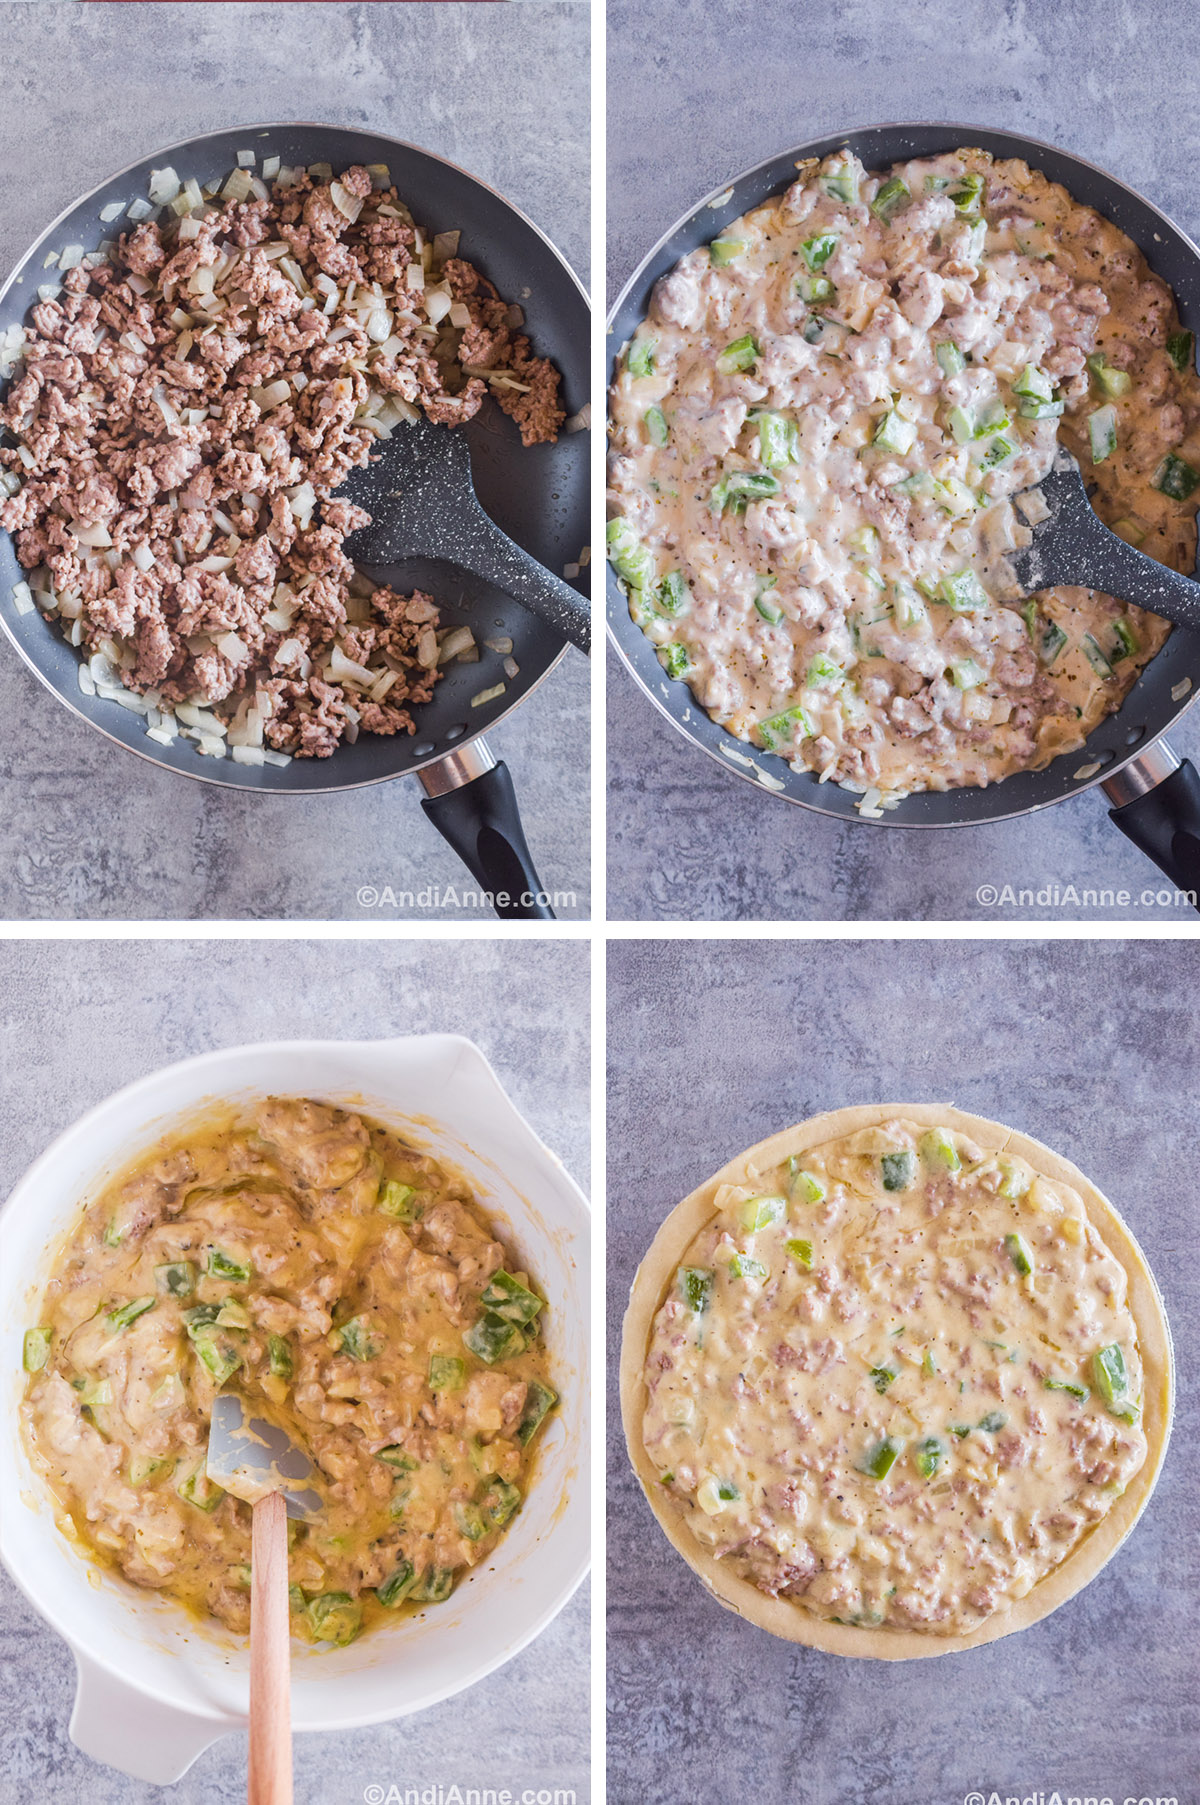 Four images showing steps to make the recipe. First is ground pork and onion in a frying pan. Second is a creamy mixture of ground pork with bell peppers in a frying pan. Third image is uncooked quiche filling in a white bowl with a spatula. Fourth is uncooked ground pork quiche.